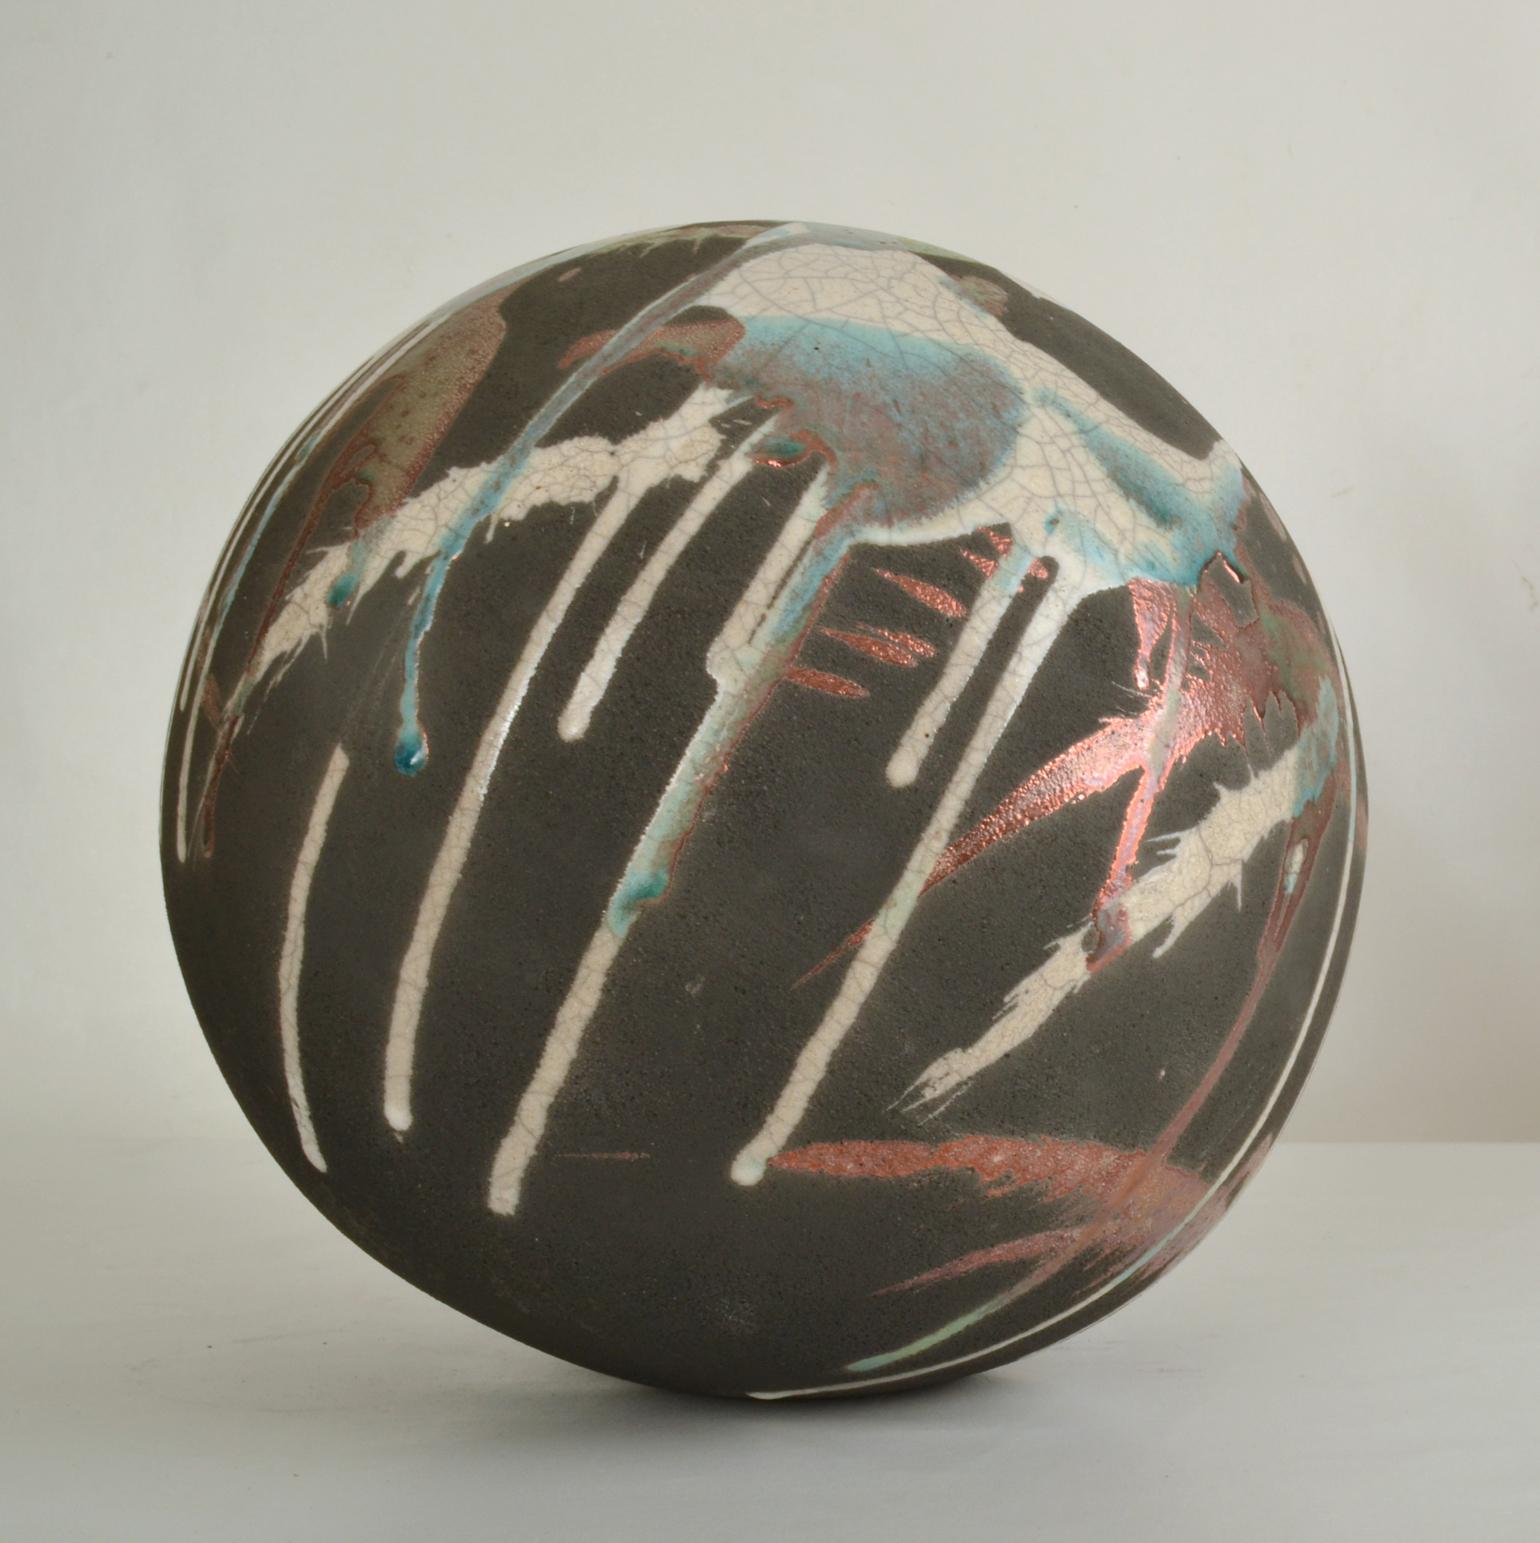 Abstract Spherical Ceramic Sculpture  In Excellent Condition For Sale In London, GB